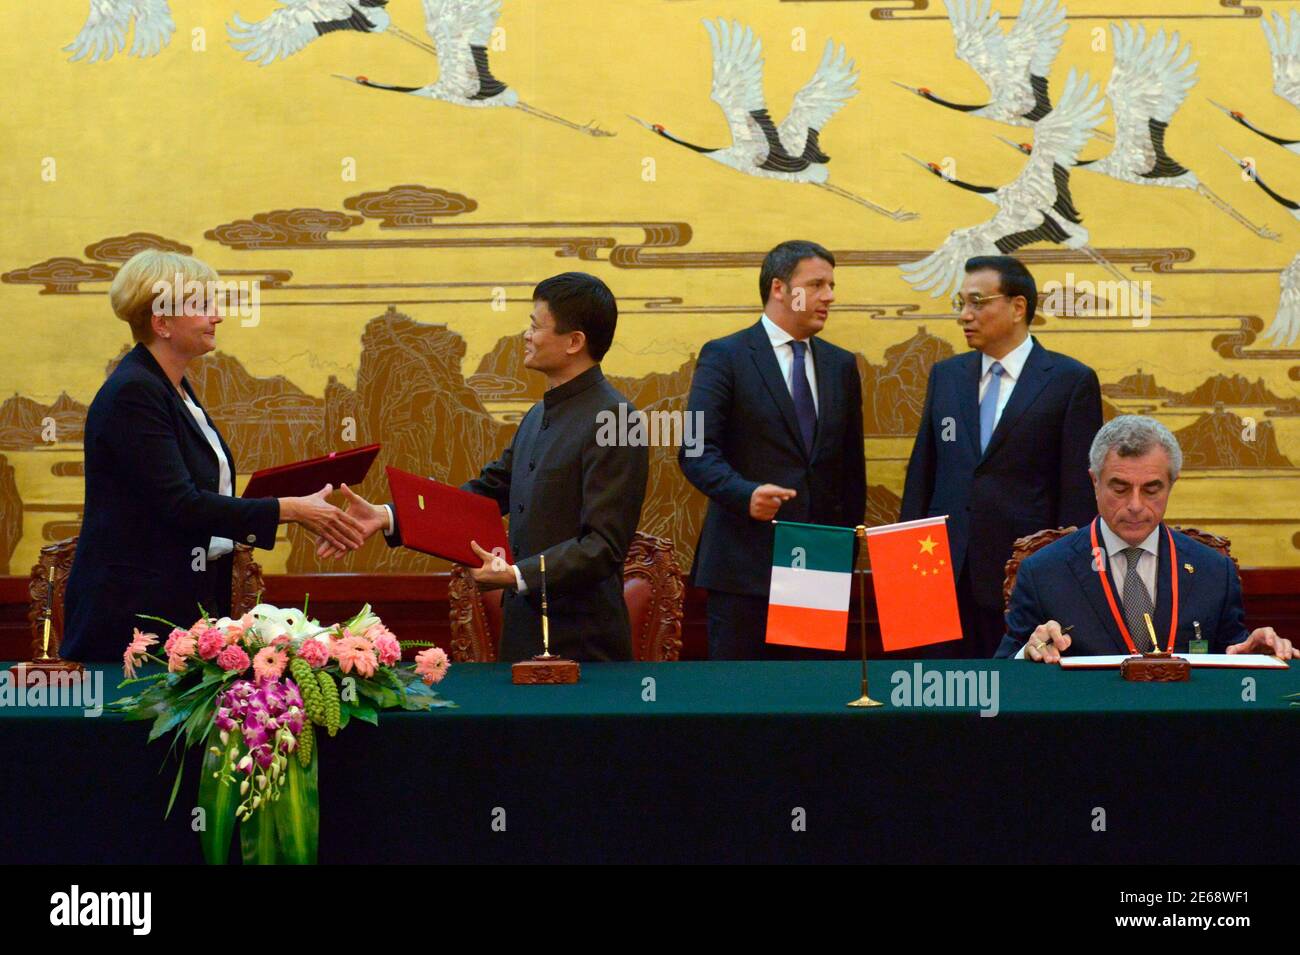 Italian Prime Minister Matteo Renzi (C) talks with Chinese Premier Li Keqiang (2nd R) as Alibaba CEO Ma Yun (2nd L) attends a signing ceremony at the Great Hall of the People in Beijing June 11, 2014. Renzi is visiting China from June 10 to 12. REUTERS/Wang Zhao/Pool (CHINA - Tags: POLITICS BUSINESS) Stock Photo